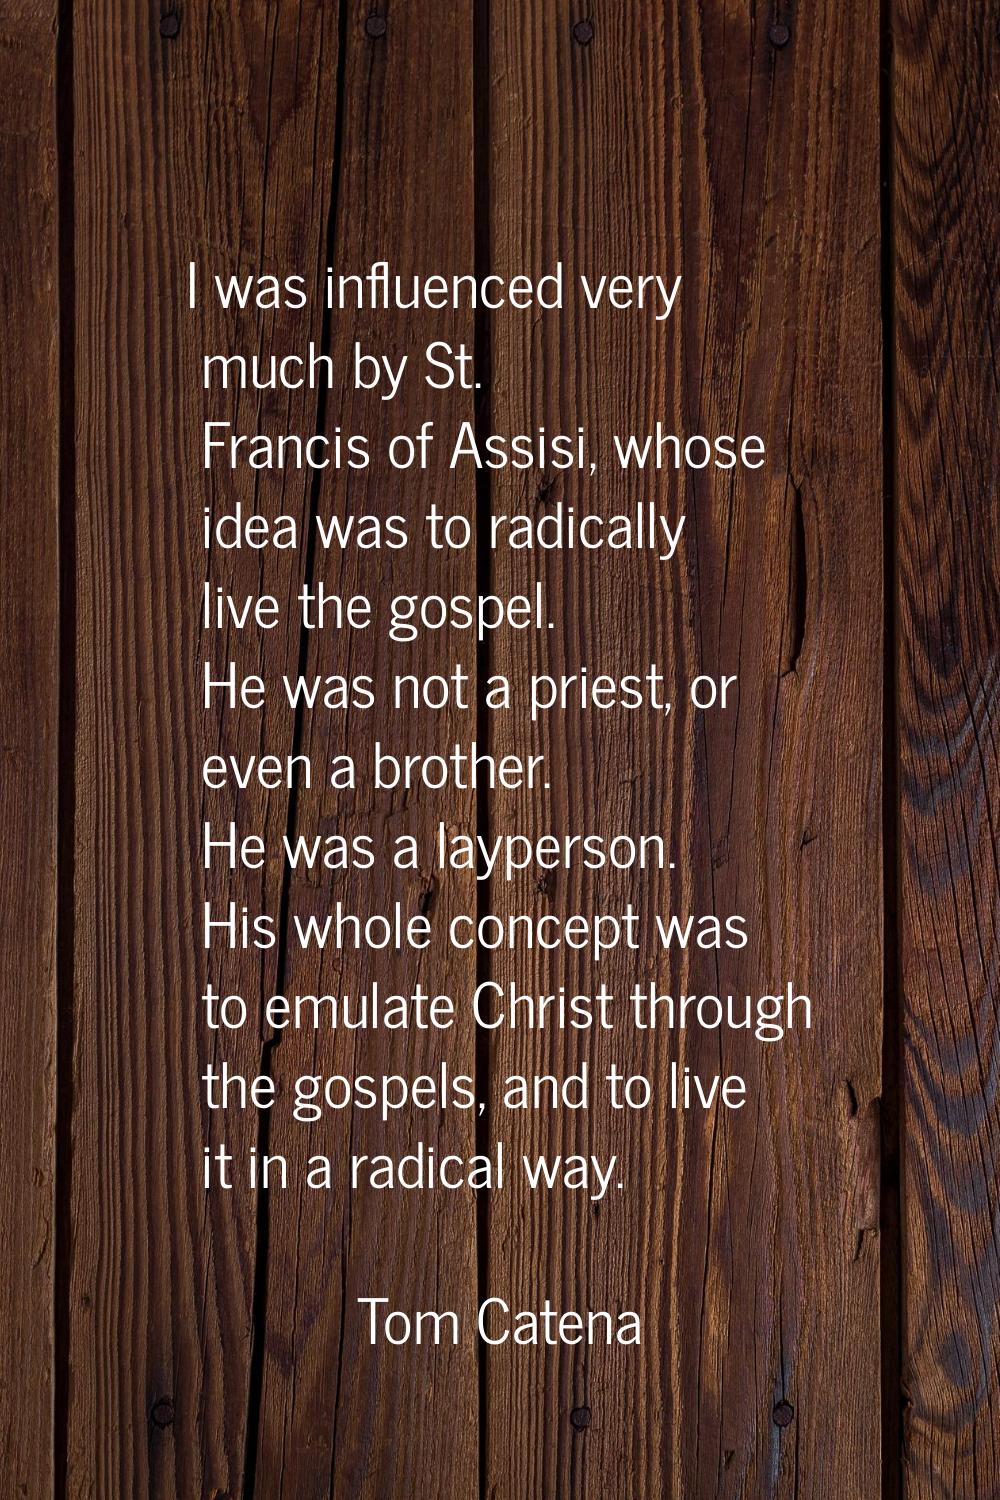 I was influenced very much by St. Francis of Assisi, whose idea was to radically live the gospel. H